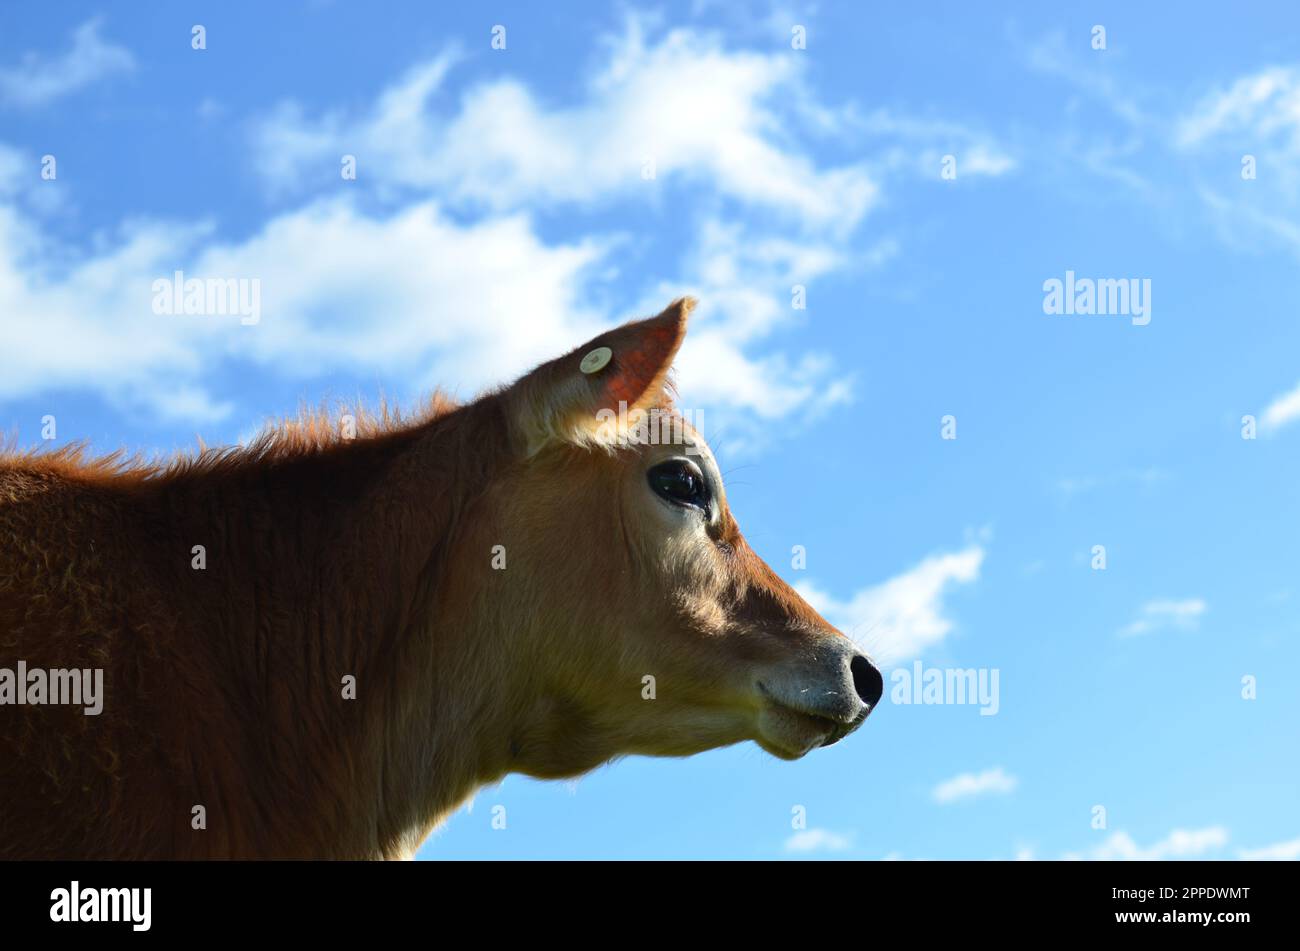 Purebred Jersey Heifer Cow With Sky Background. Stock Photo